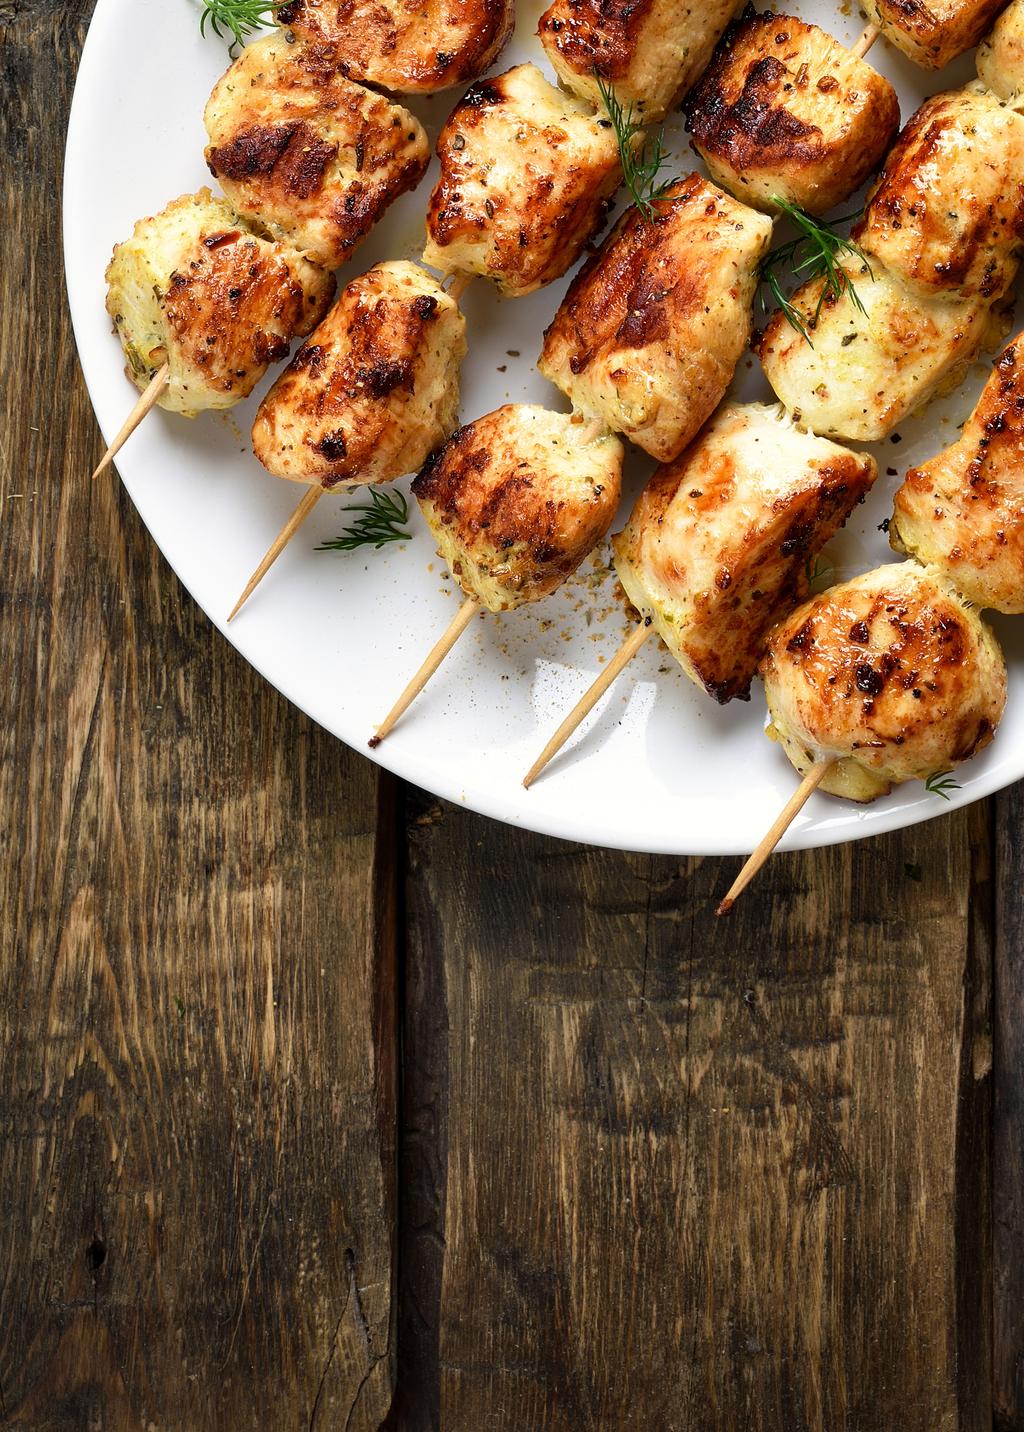 JERK CHICKEN KEBABS These delicious kebabs will bring a little Caribbean flavour to mealtimes. You ll need 8 wooden skewers to make them. At just 2.